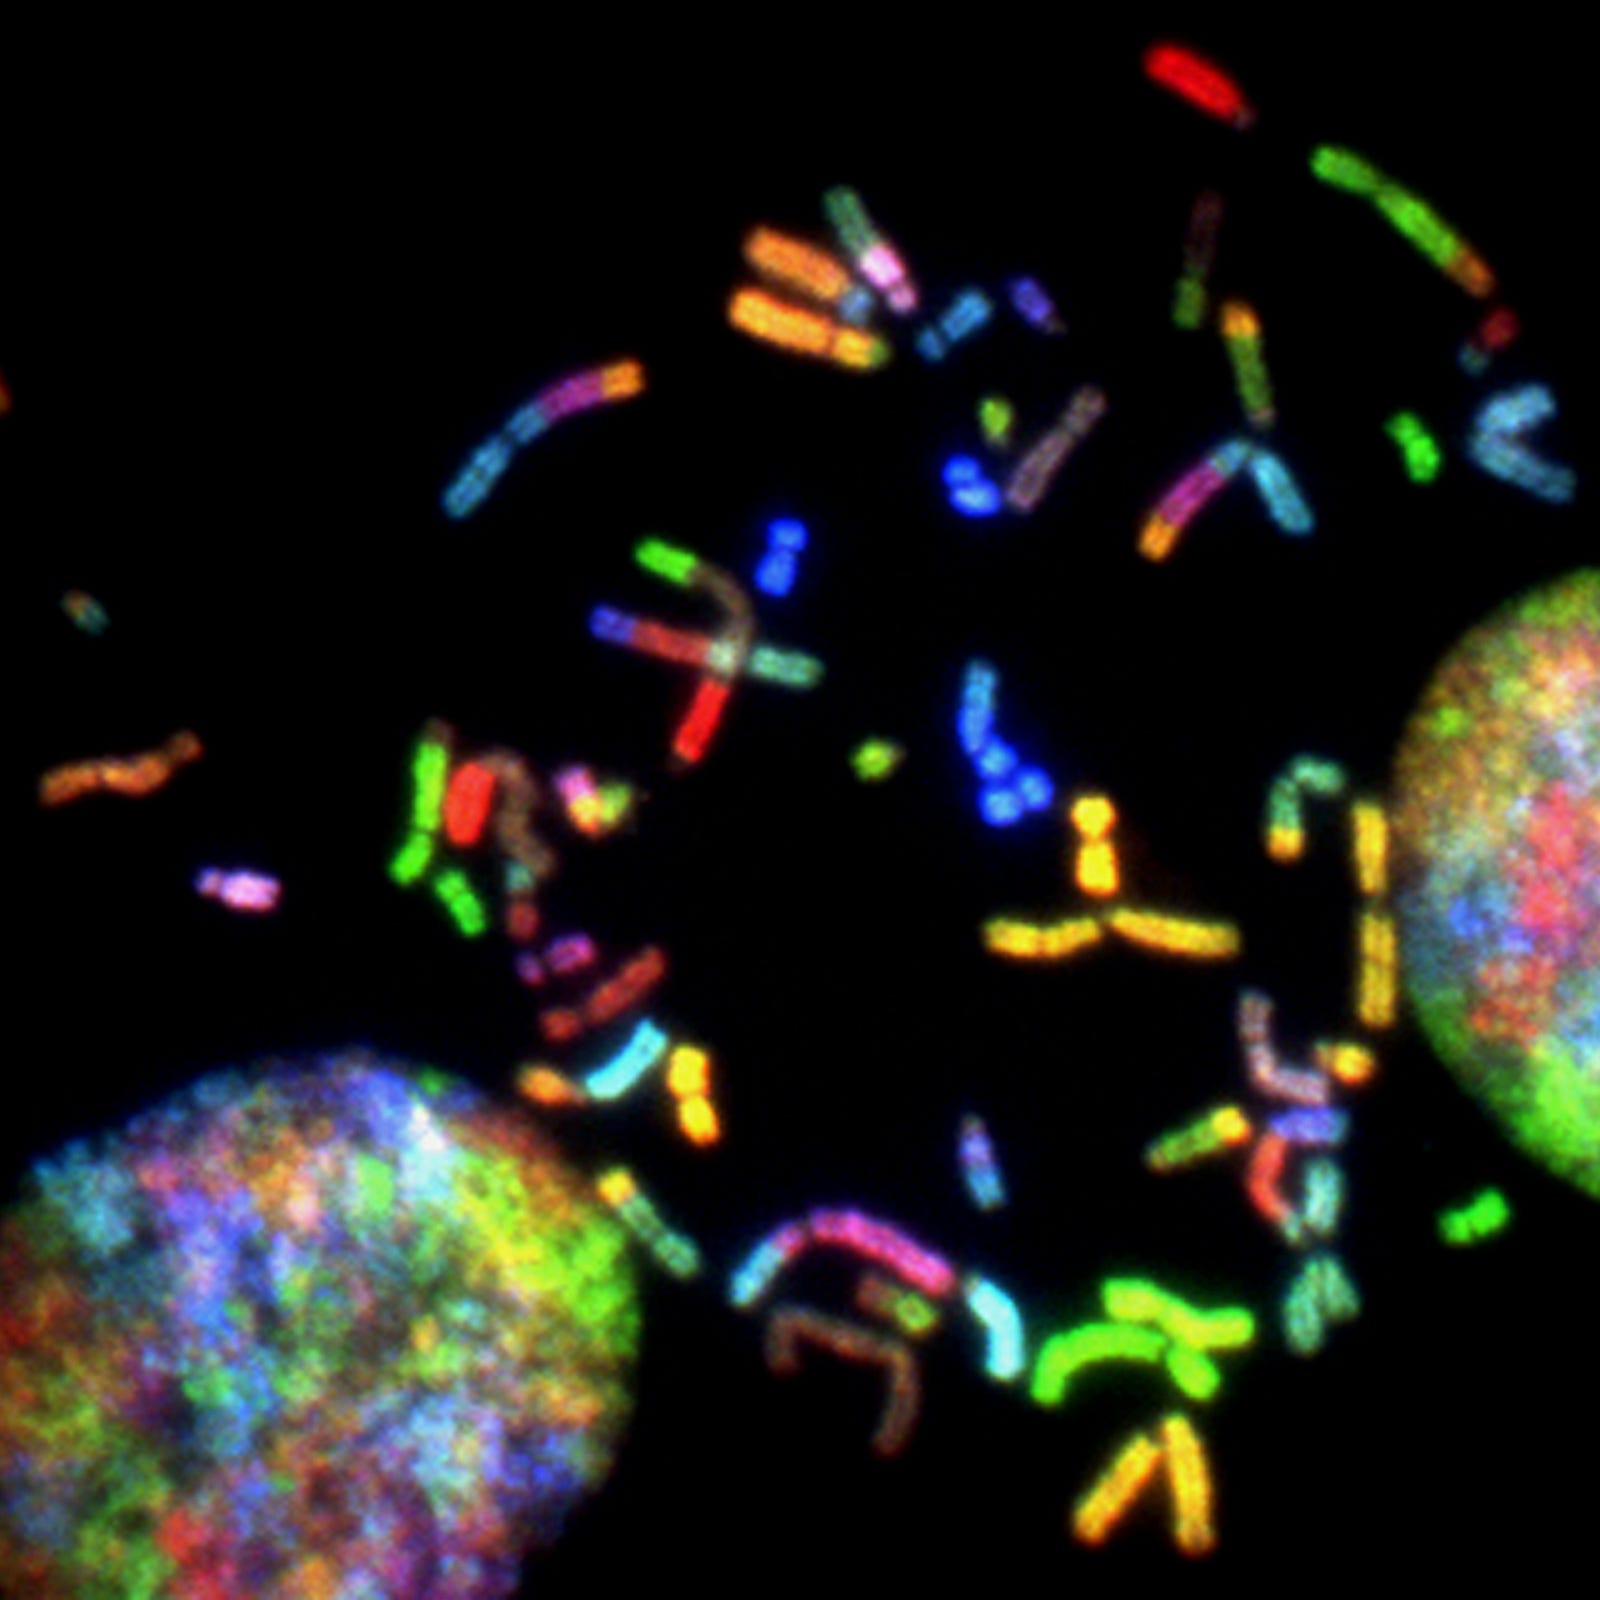 Multicolored genes as seen in a photomicrograph.